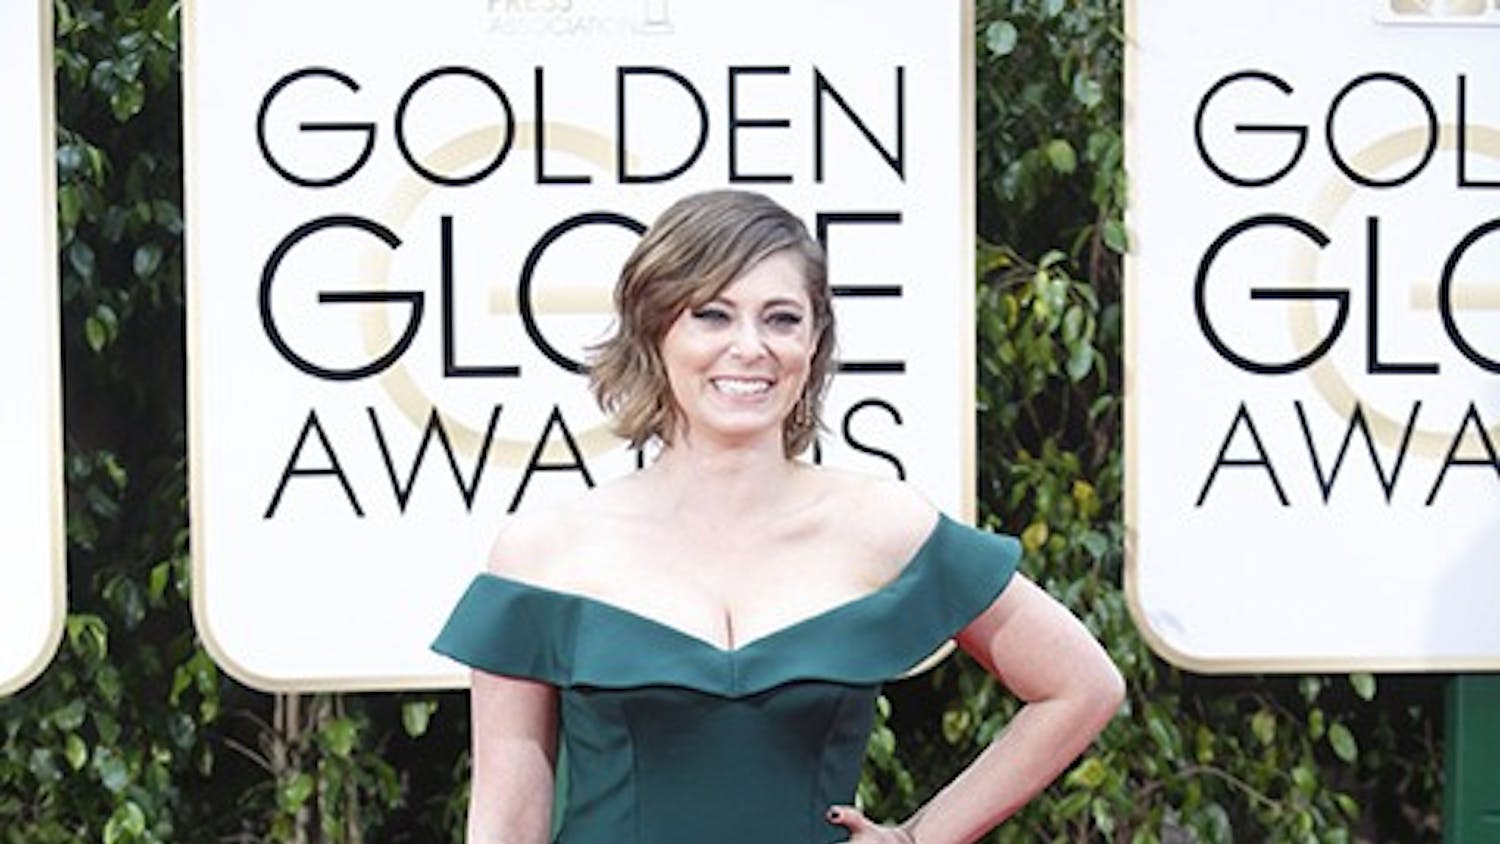 Rachel Bloom arrives at the 73rd Annual Golden Globe Awards show at the Beverly Hilton Hotel in Beverly Hills, Calif., on Sunday, Jan. 10, 2016. (Wally Skalij/Los Angeles Times/TNS)